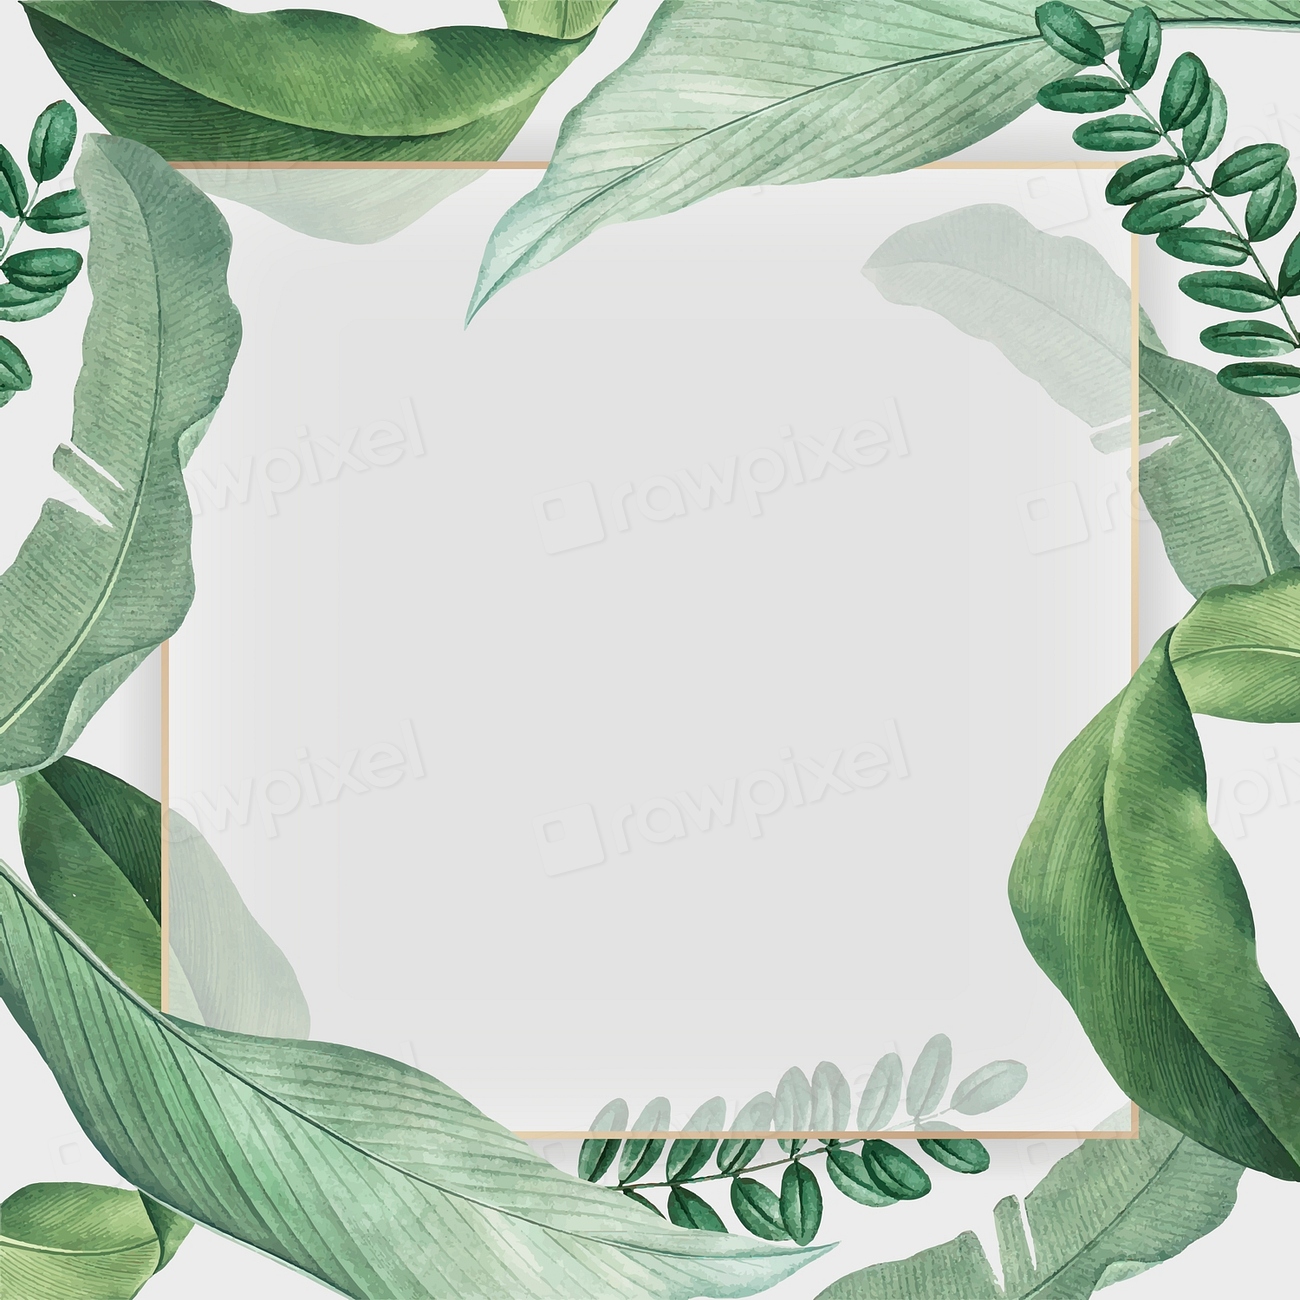 Gold frame on a tropical | Premium Vector - rawpixel